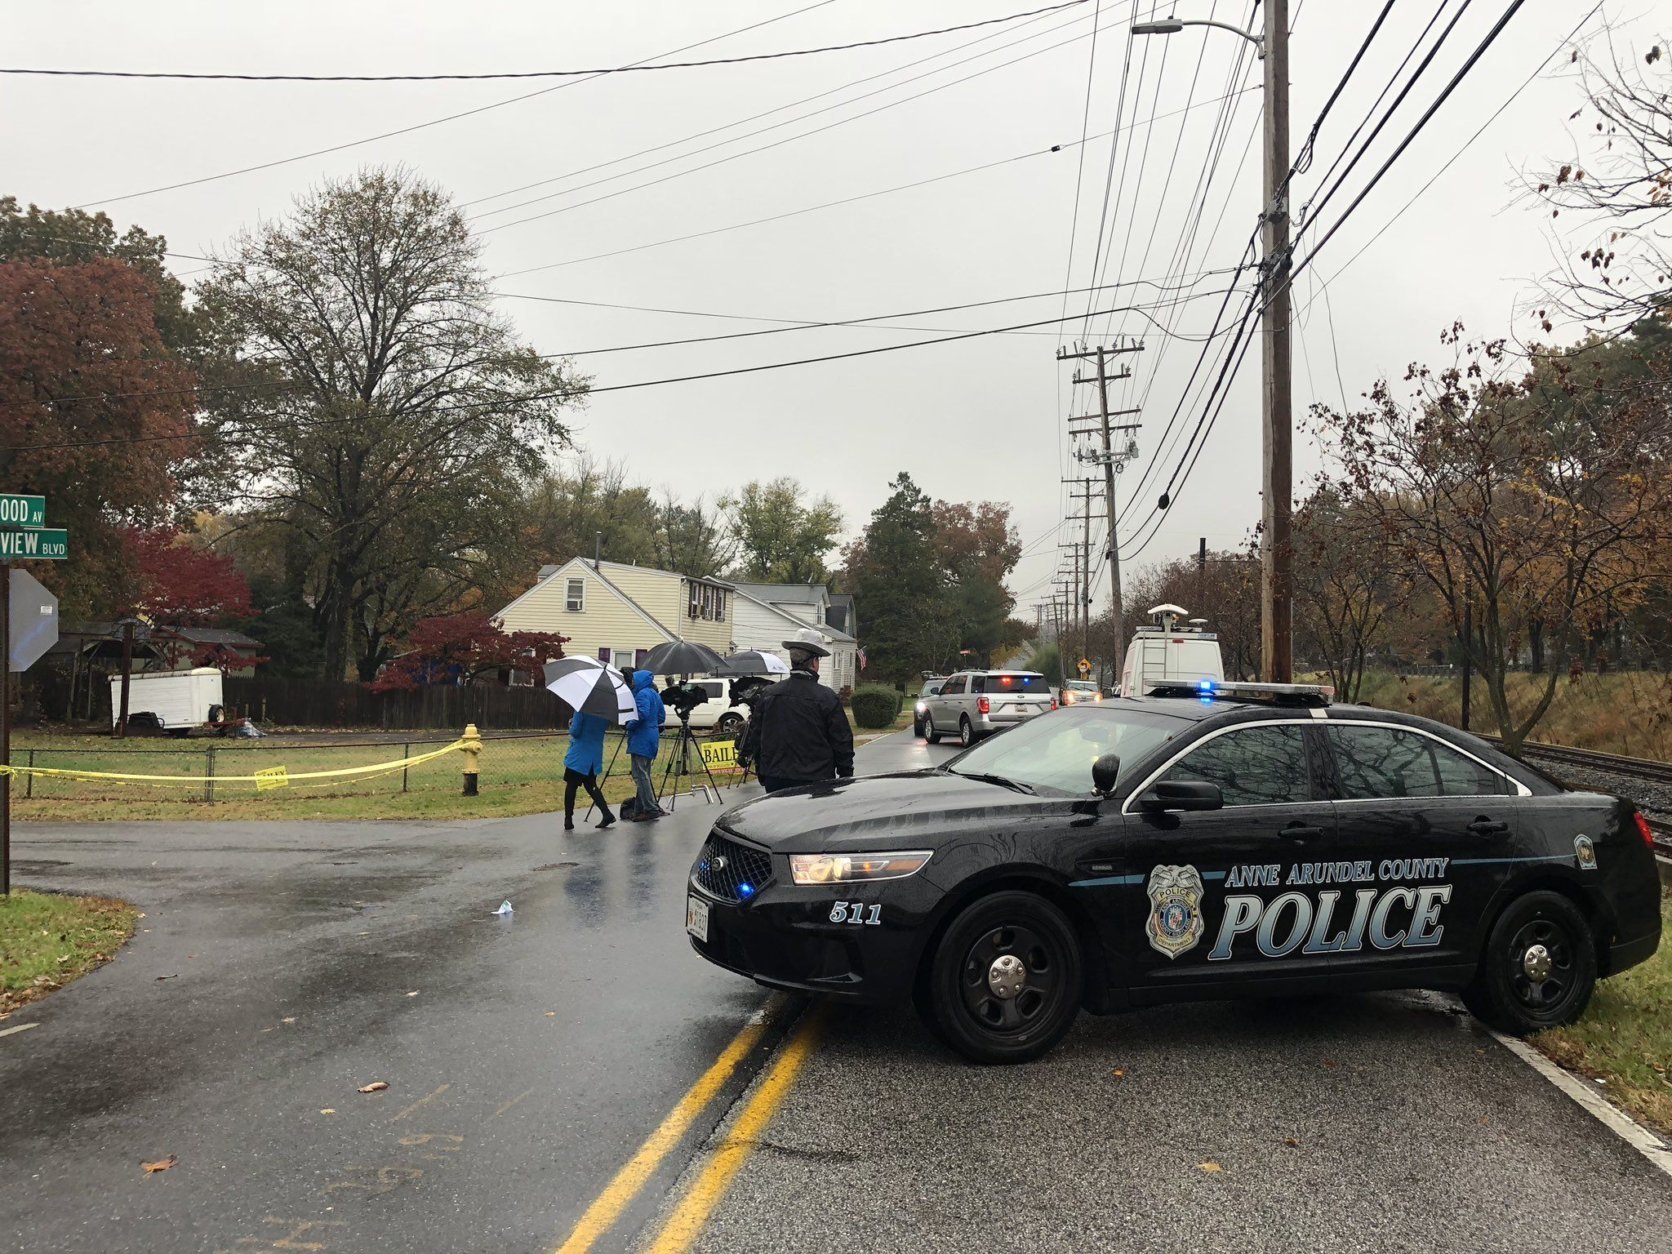 Police are still on the scene of an early-morning shooting in which an officer killed a man Monday. (WTOP/Melissa Howell)